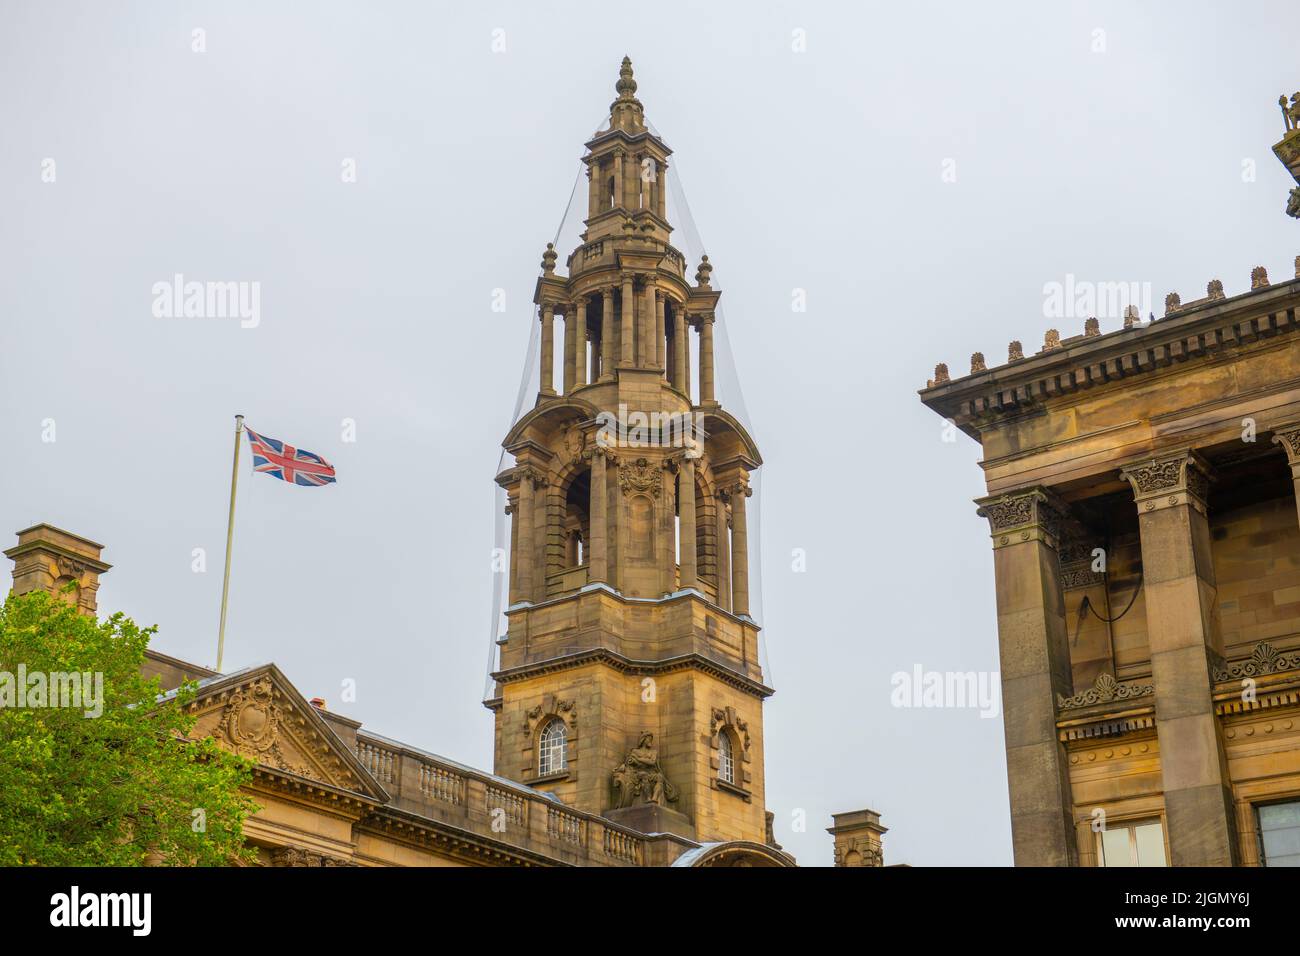 Sessions House is a courthouse on Harris Street at Preston Flag Market in historic city centre of Preston, Lancashire, UK. Stock Photo